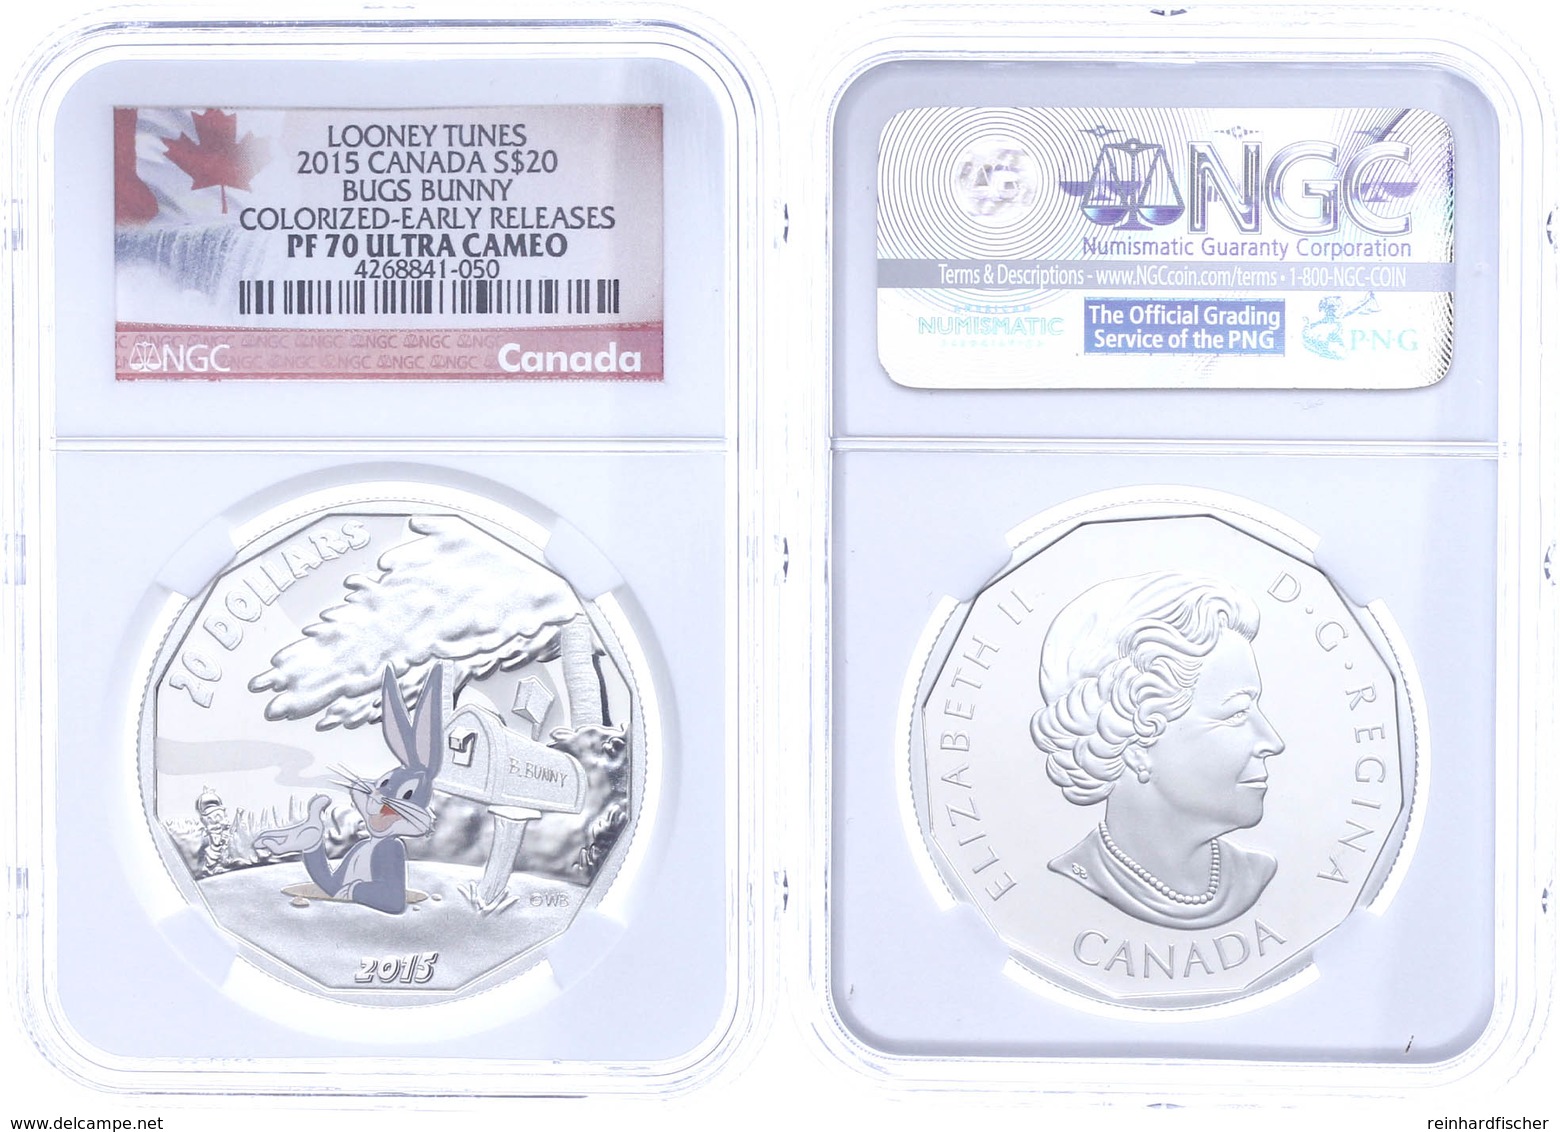 20 Dollars, 2015, Looney Tunes-Bugs Bunny, In Slab Der NGC Mit Der Bewertung PF 70 Ultra Cameo, Colorized Early Releases - Canada